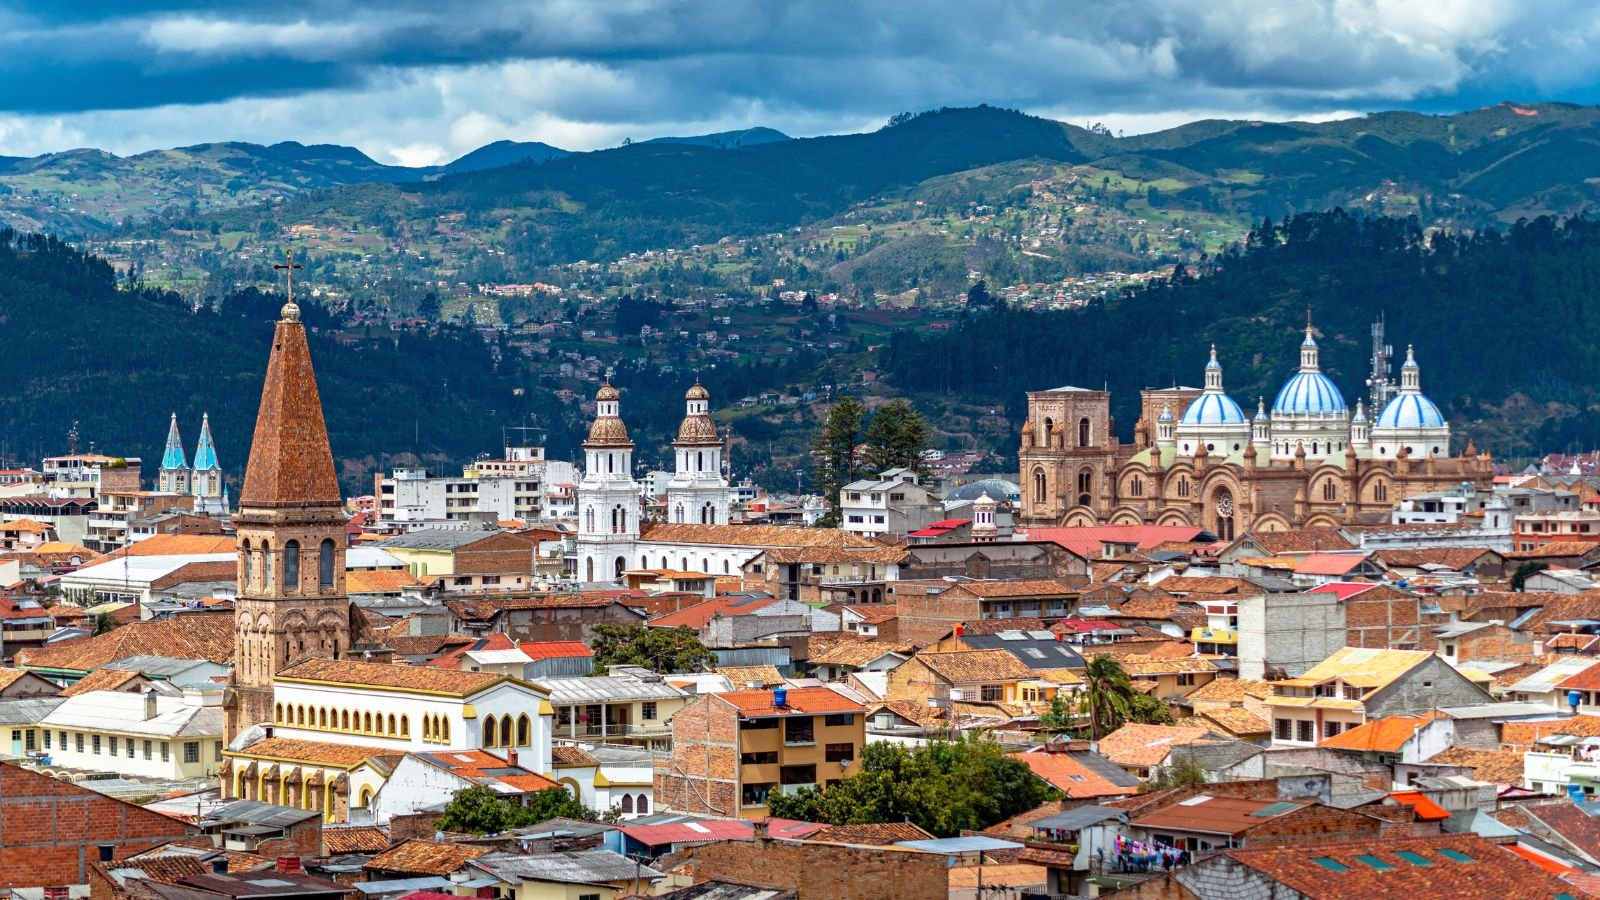 <p><a href="https://livingcost.org/cost/ecuador/cuenca" rel="noopener">Average Cost Of Living</a> (Per Person)- $427</p> <p>Average Rent and Utilities (Per Person)- $363</p> <p>Crowned the best retirement spot on Earth by InternationalLiving.com, Cuenca, Ecuador, offers a dream life for under $1,000 a month. Imagine lush landscapes, stunning colonial architecture, and the comfort of a two-bedroom apartment with a house help – all for a fraction of the cost elsewhere. This walkable city boasts a friendly expat community, affordable healthcare, and a pleasant spring-like climate year-round.</p>